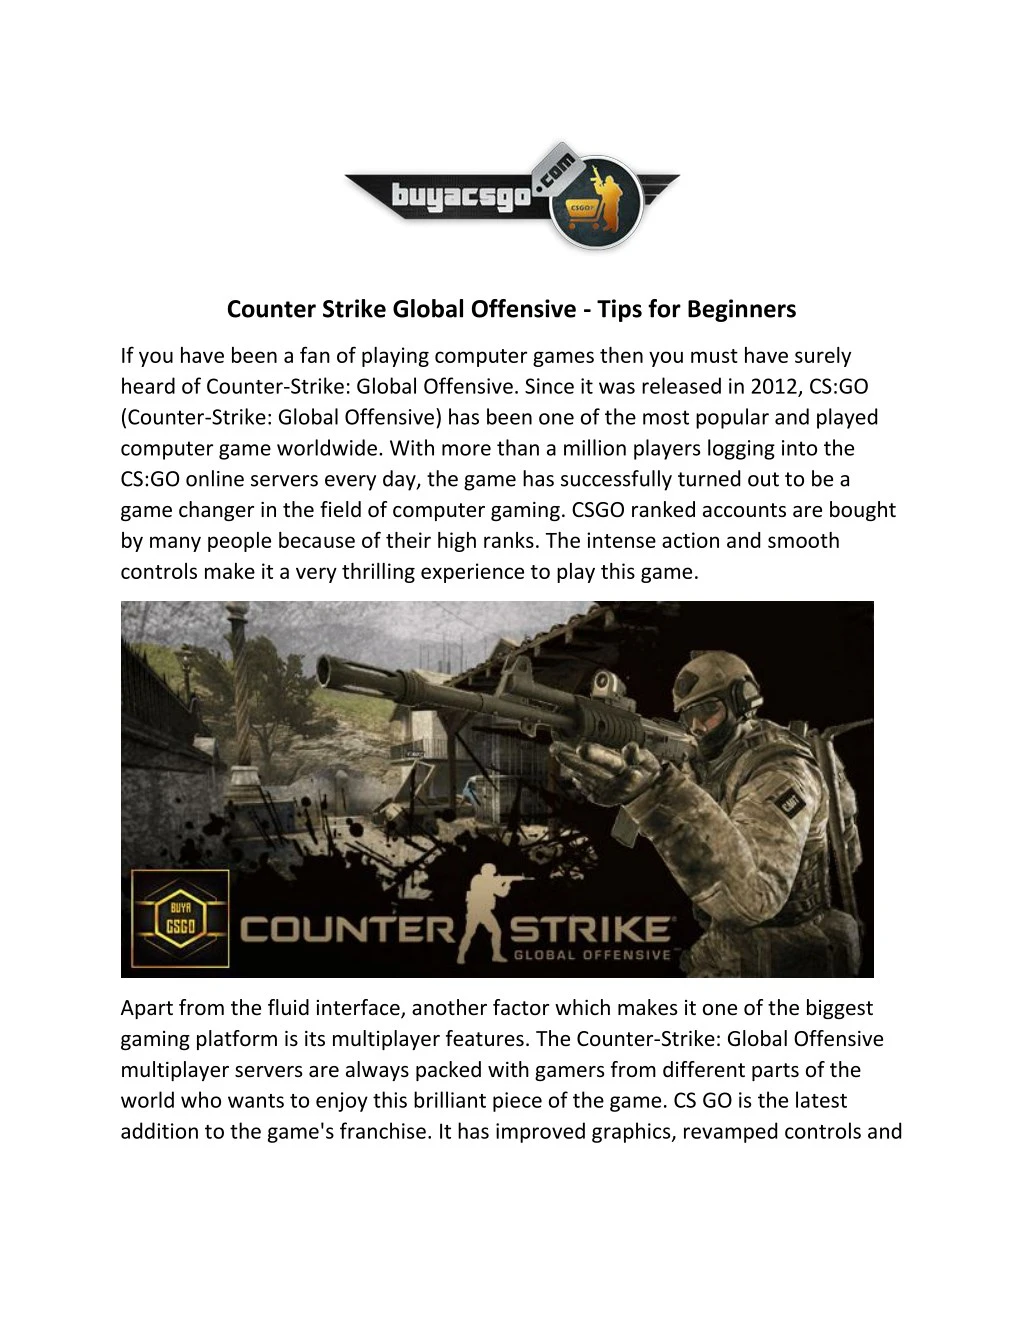 counter strike global offensive tips for beginners